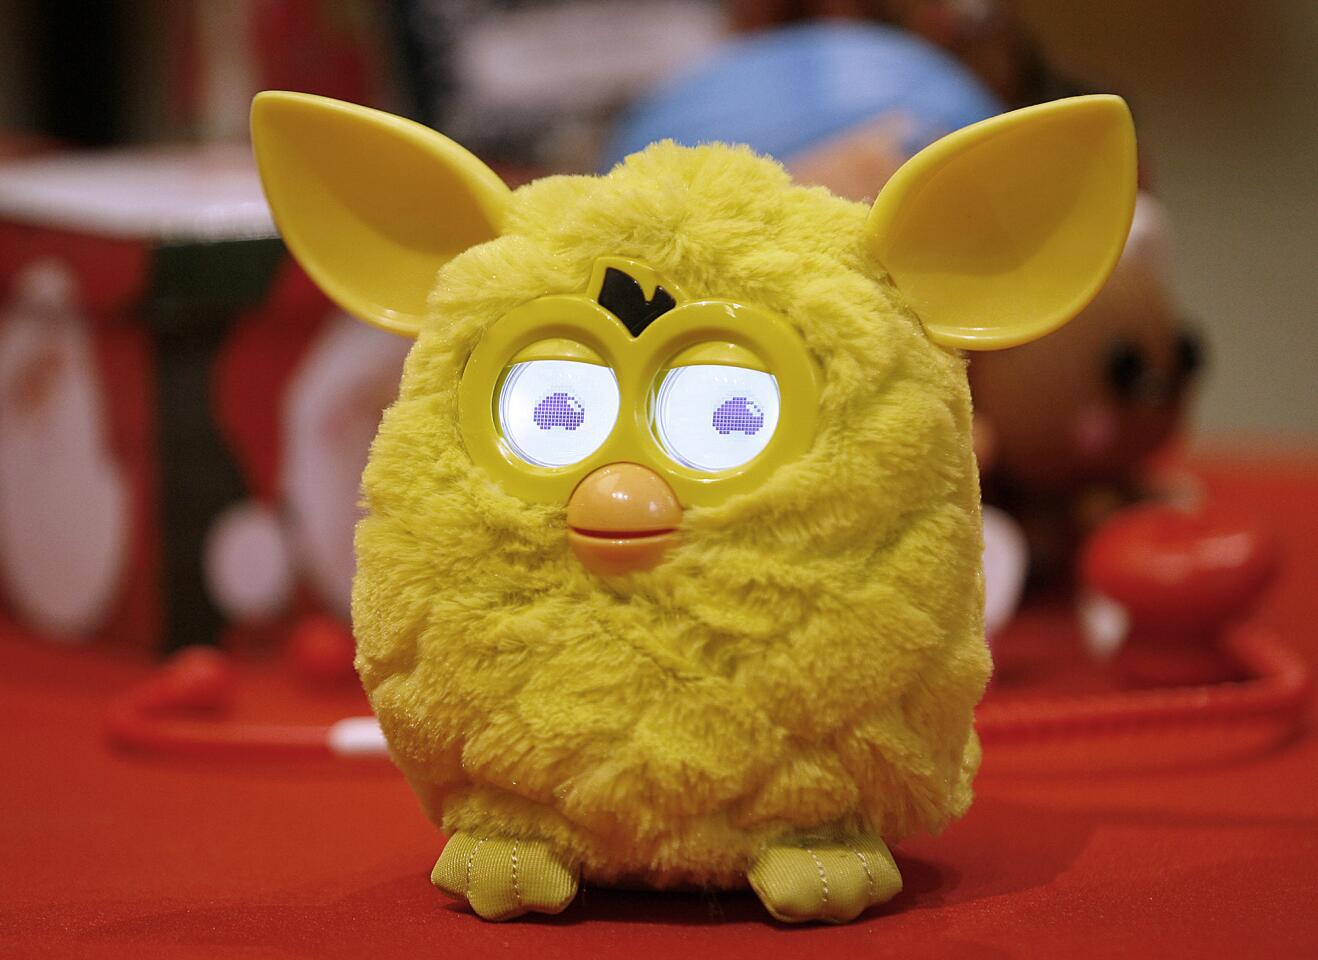 The new Furby toy from the Toys R Us pop up store at the Glendale Galleria was highlighted during holiday press conference at the Glendale indoor mall on Tuesday, Nov. 13, 2012. Furby, at a cost of $54, comes in six colors, can interact with other Furbys and according to a press release, is "emotional and unpredictable."